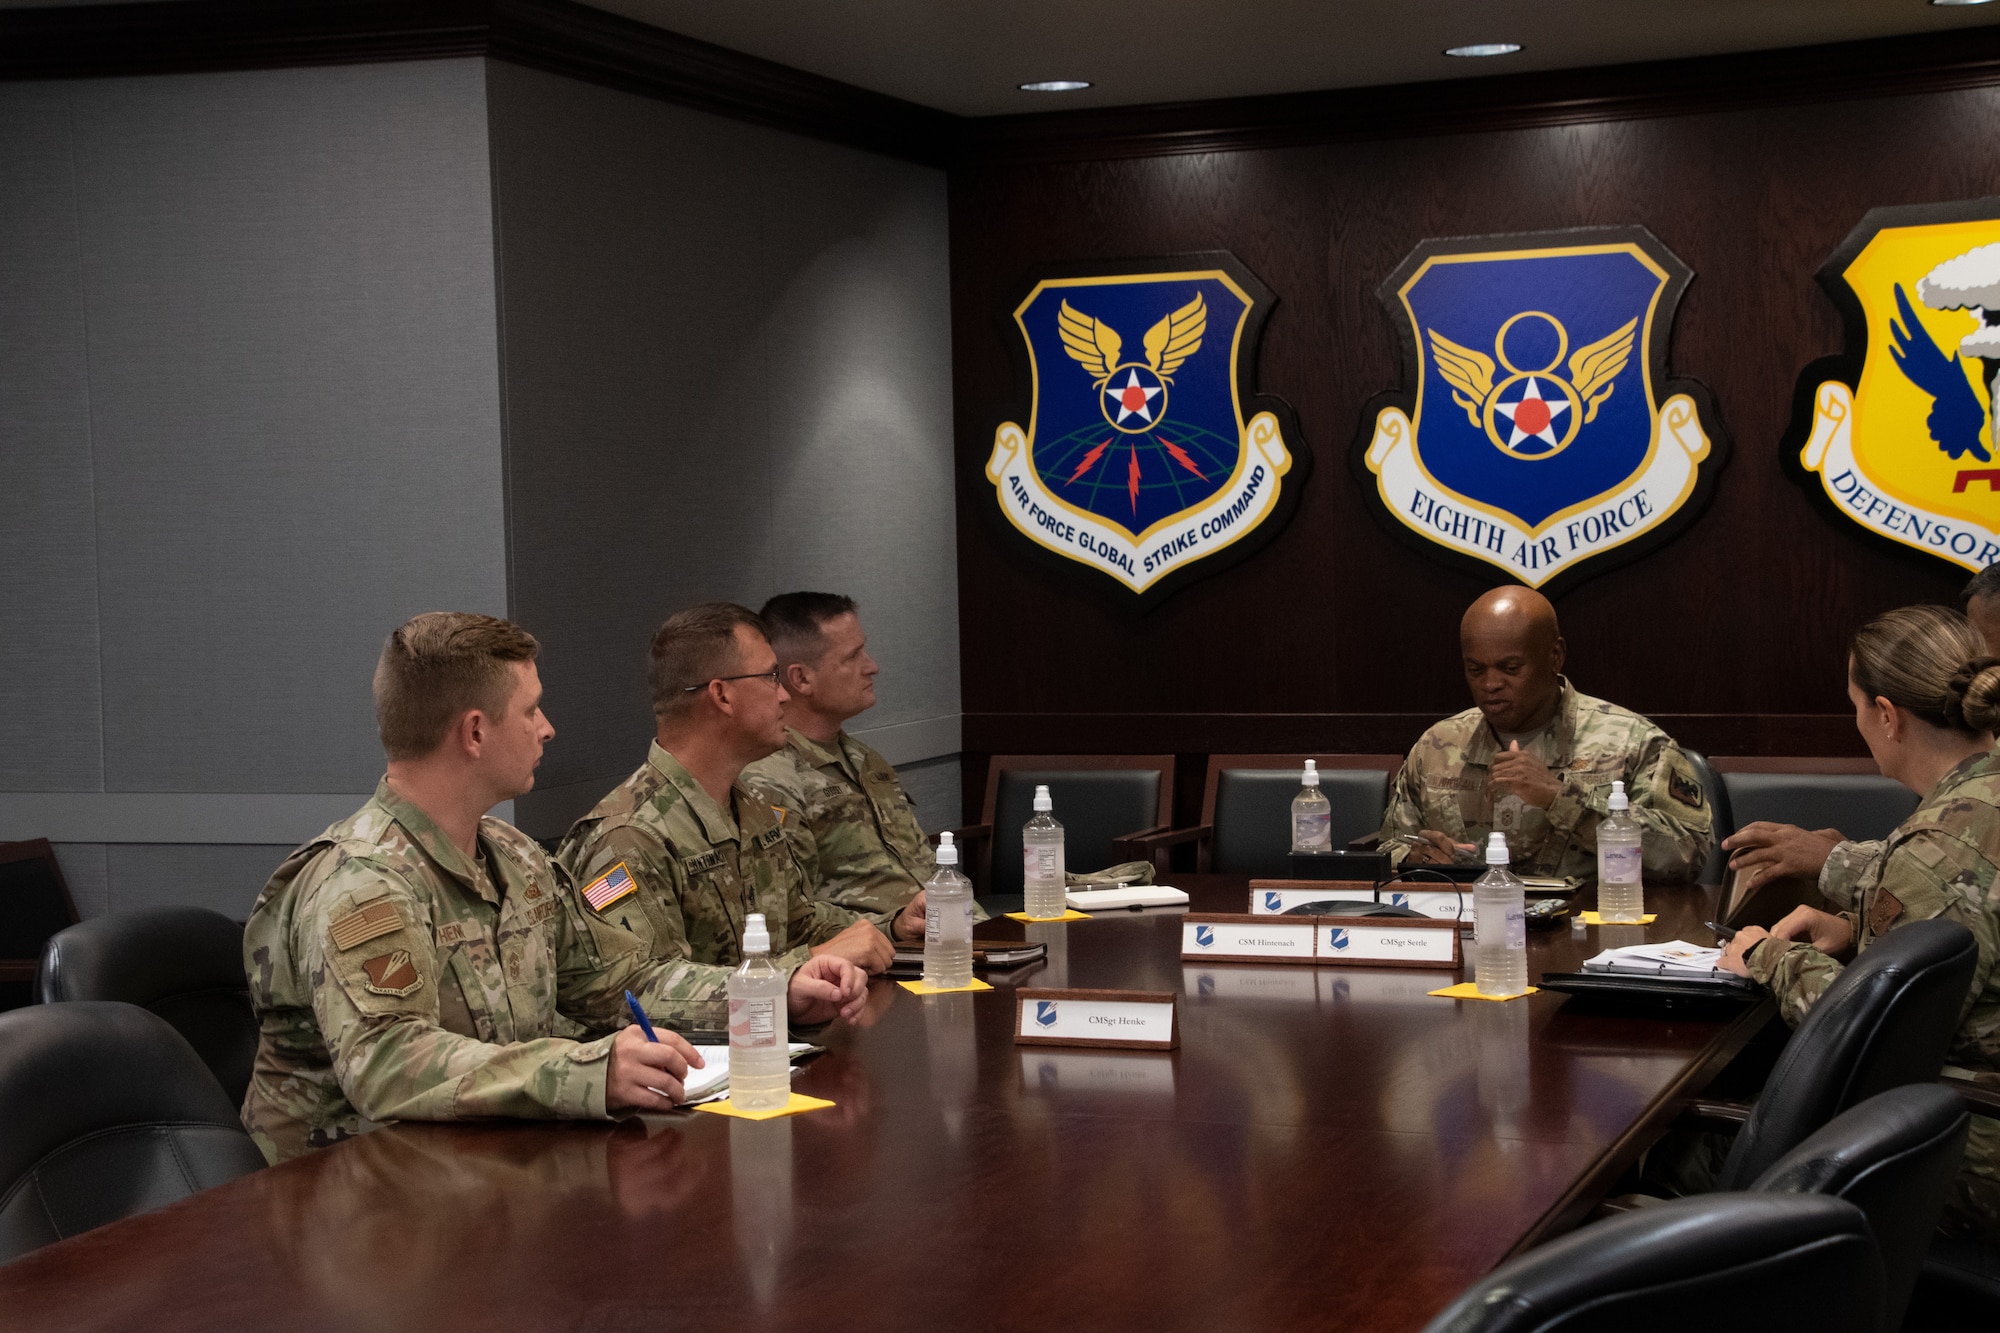 U.S. Air Force Senior Enlisted Advisor Tony L. Whitehead, the senior enlisted advisor to the chief of the National Guard Bureau, discusses with enlisted leadership at Whiteman Air Force Base, Missouri, Aug. 30, 2022. Whitehead visited the base to learn how National Guard Soldiers and Airmen contribute to state and national mission success. (U.S. Air National Guard photo by Airman 1st Class Phoenix Lietch)